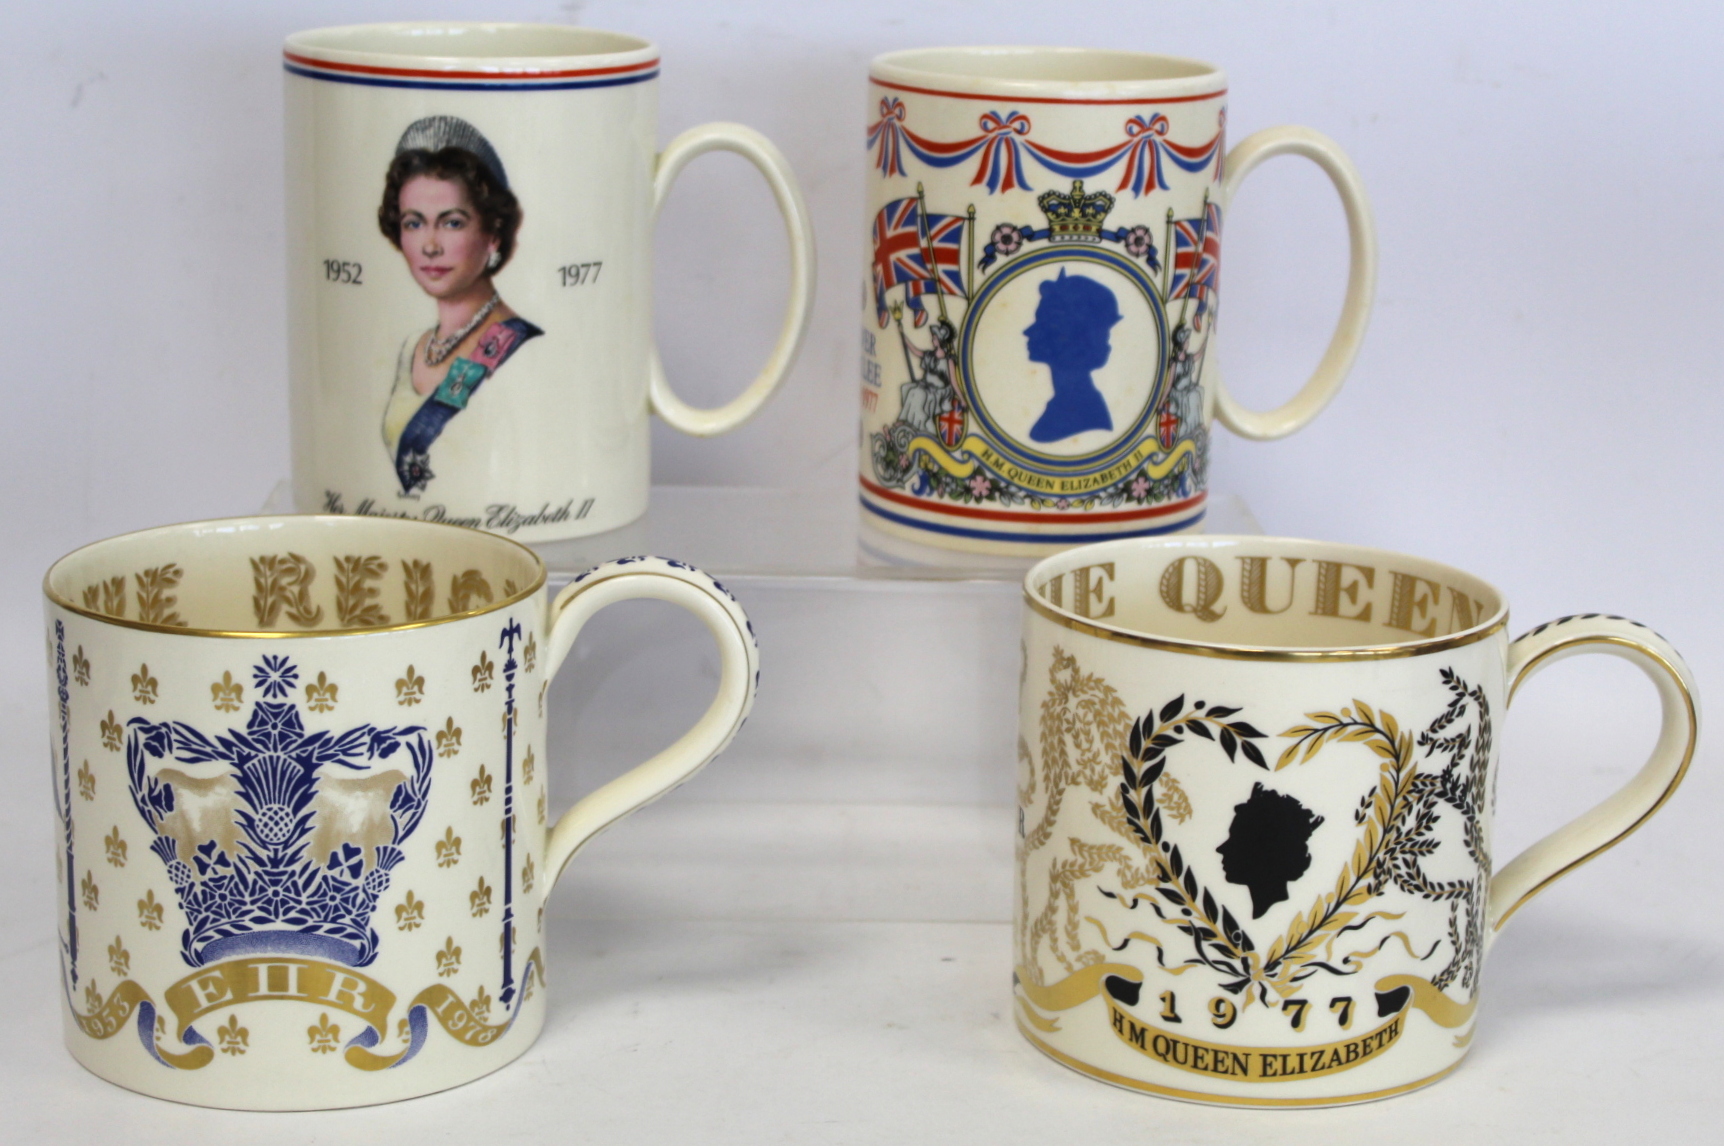 Four Wedgwood commemorative mugs for the Queen's Silver Jubilee 1977 including two designed by